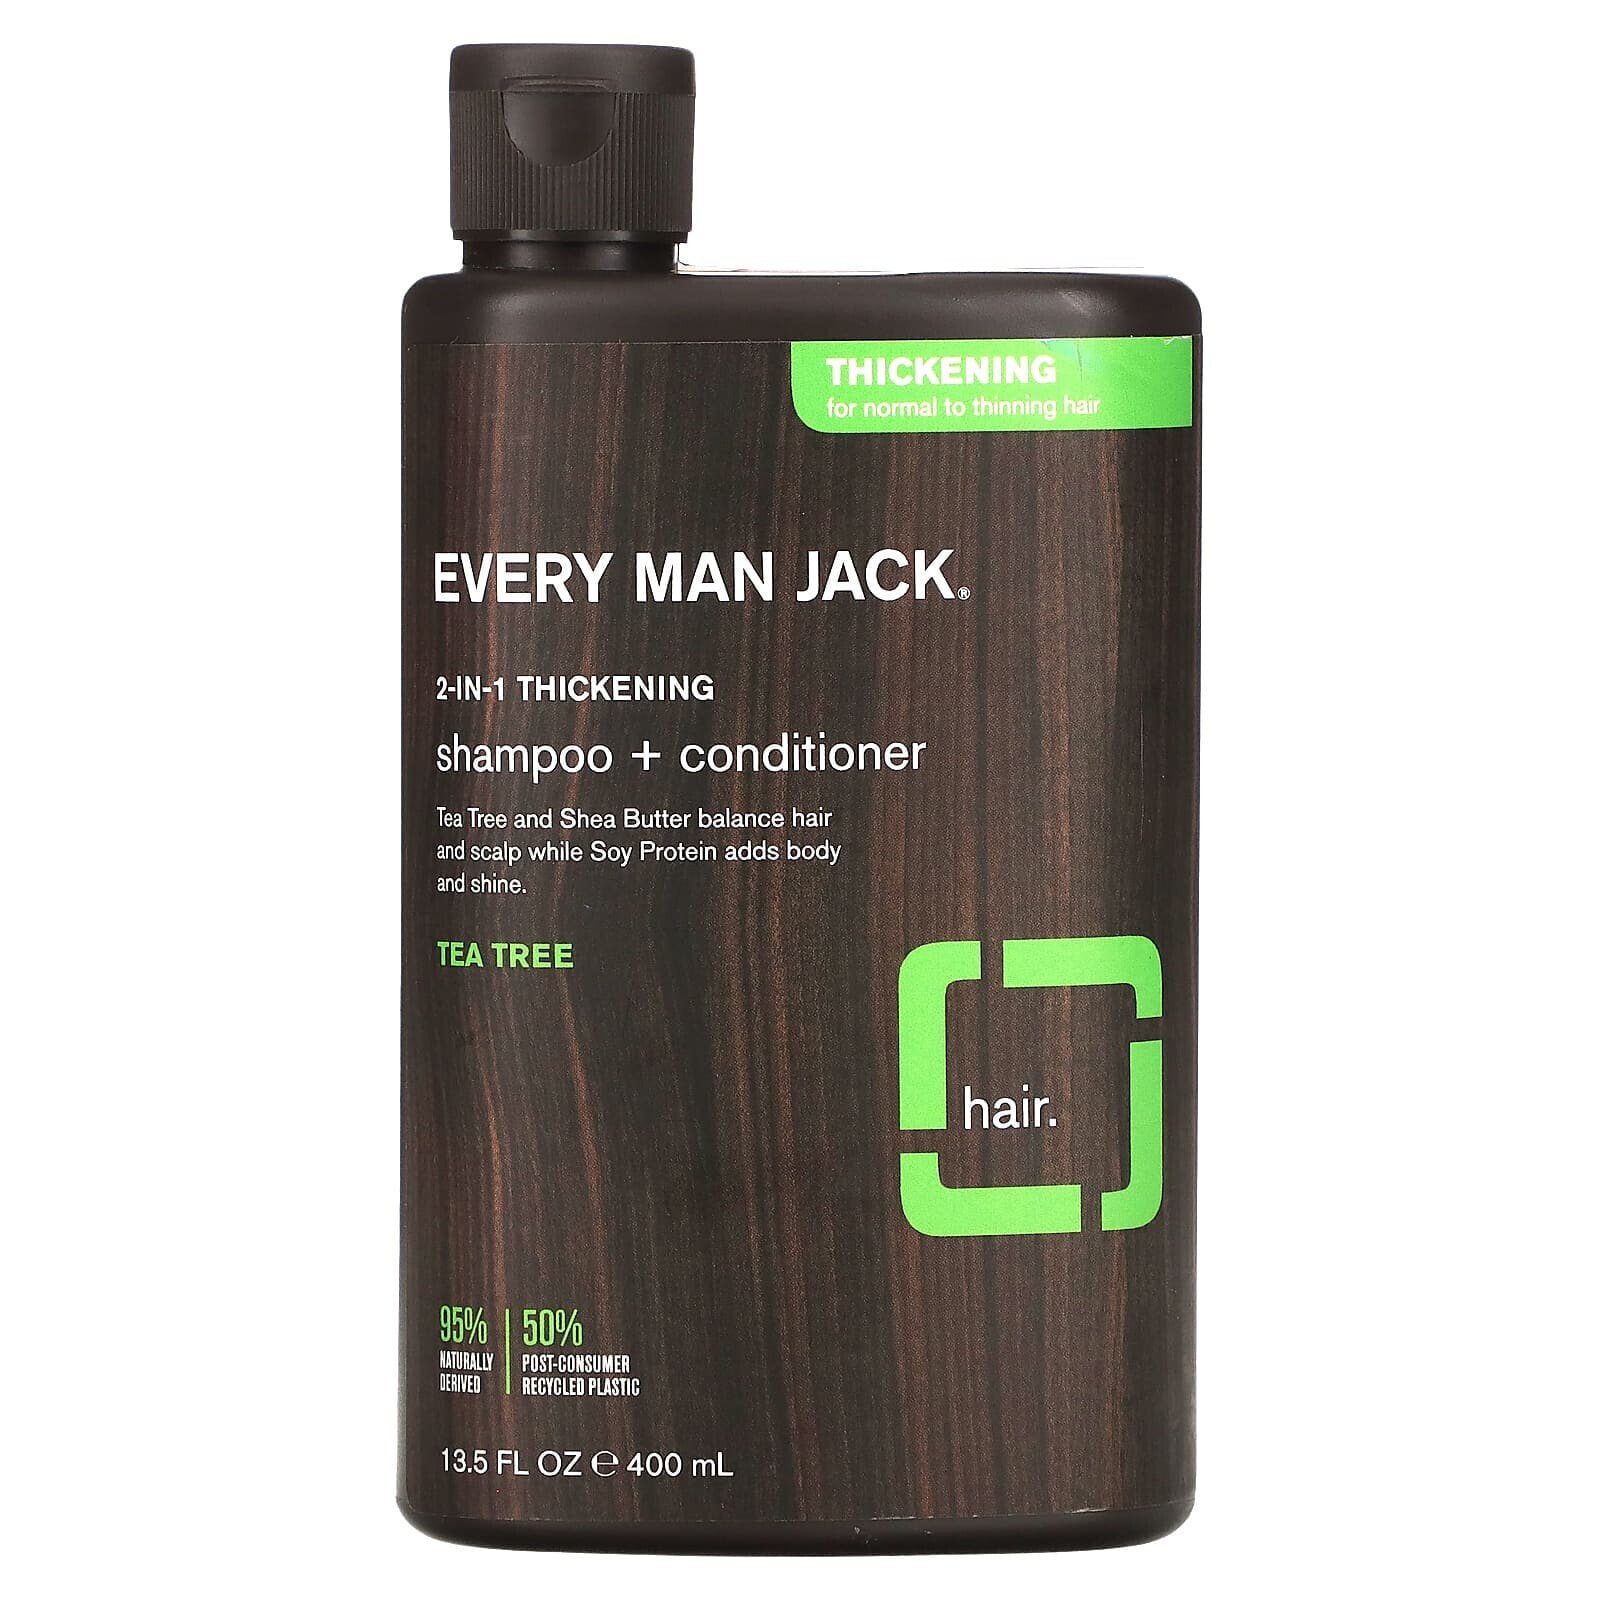 Every Man Jack, 2-in-1 Daily Shampoo & Conditioner, For All Hair Types, Sandalwood, 13.5 fl oz (400 ml)